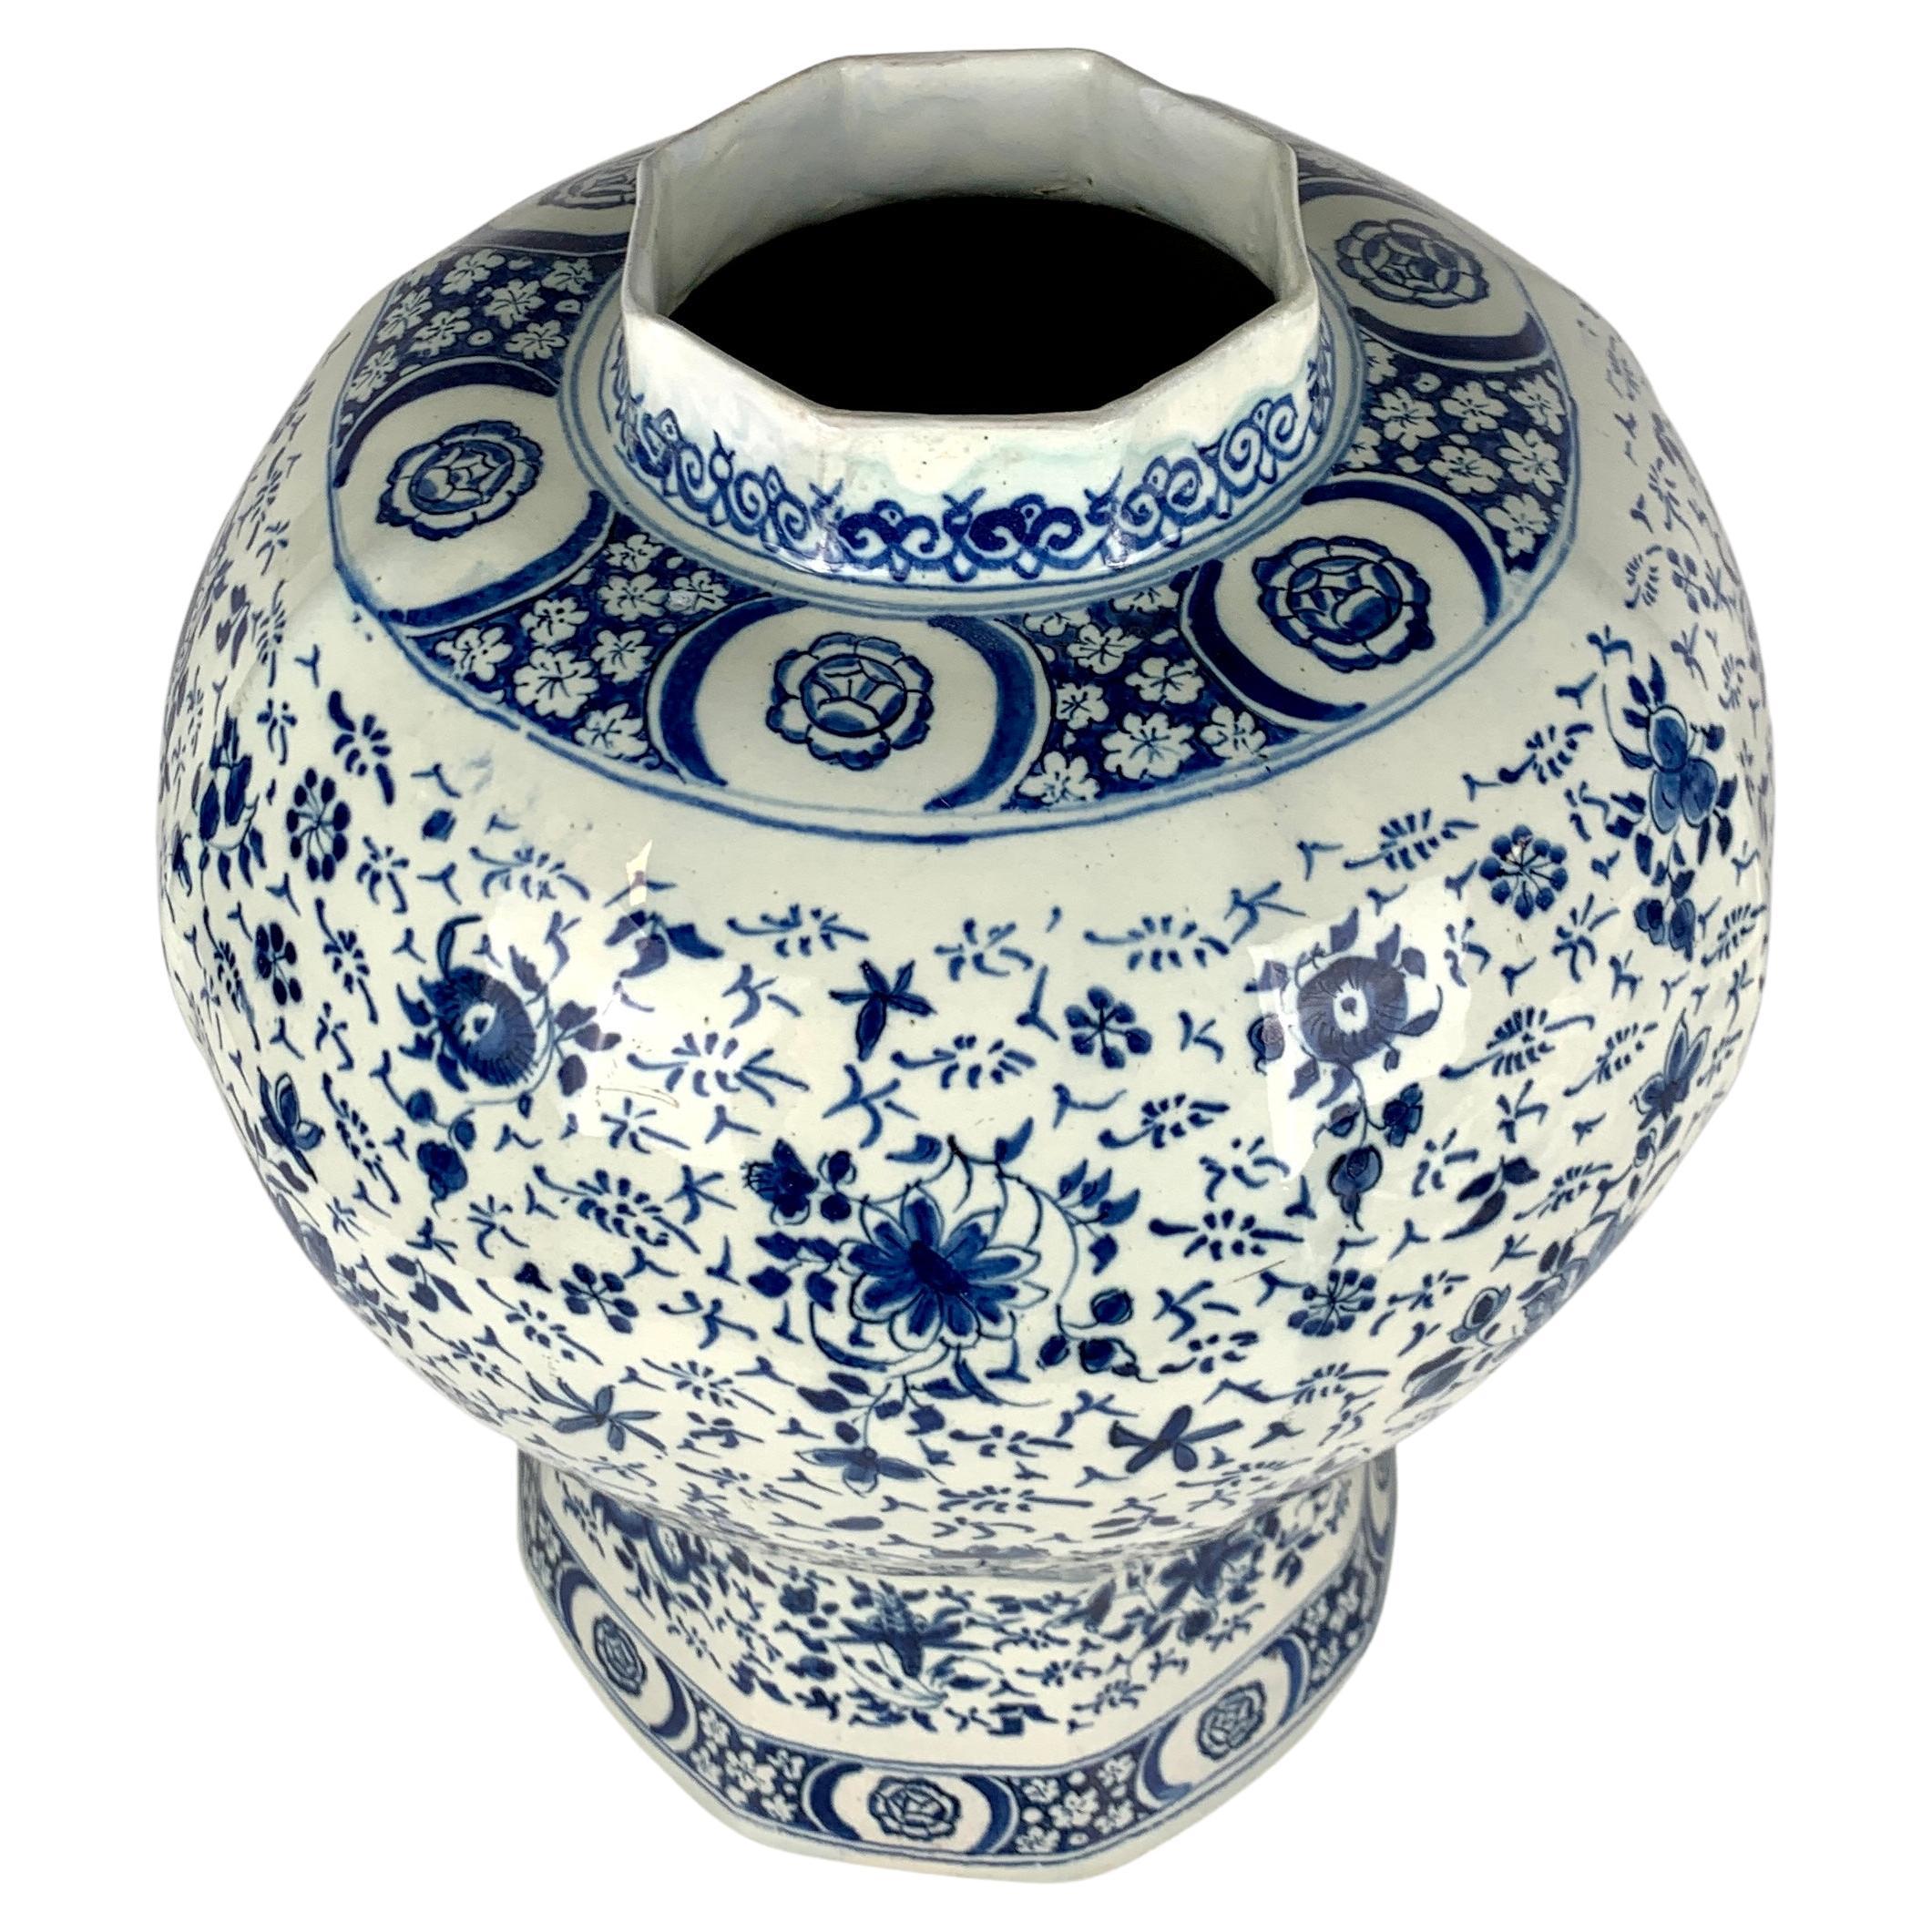 This large exquisite Dutch Delft blue and white vase is hand-painted in a medium cobalt blue with an all-around scene in the 